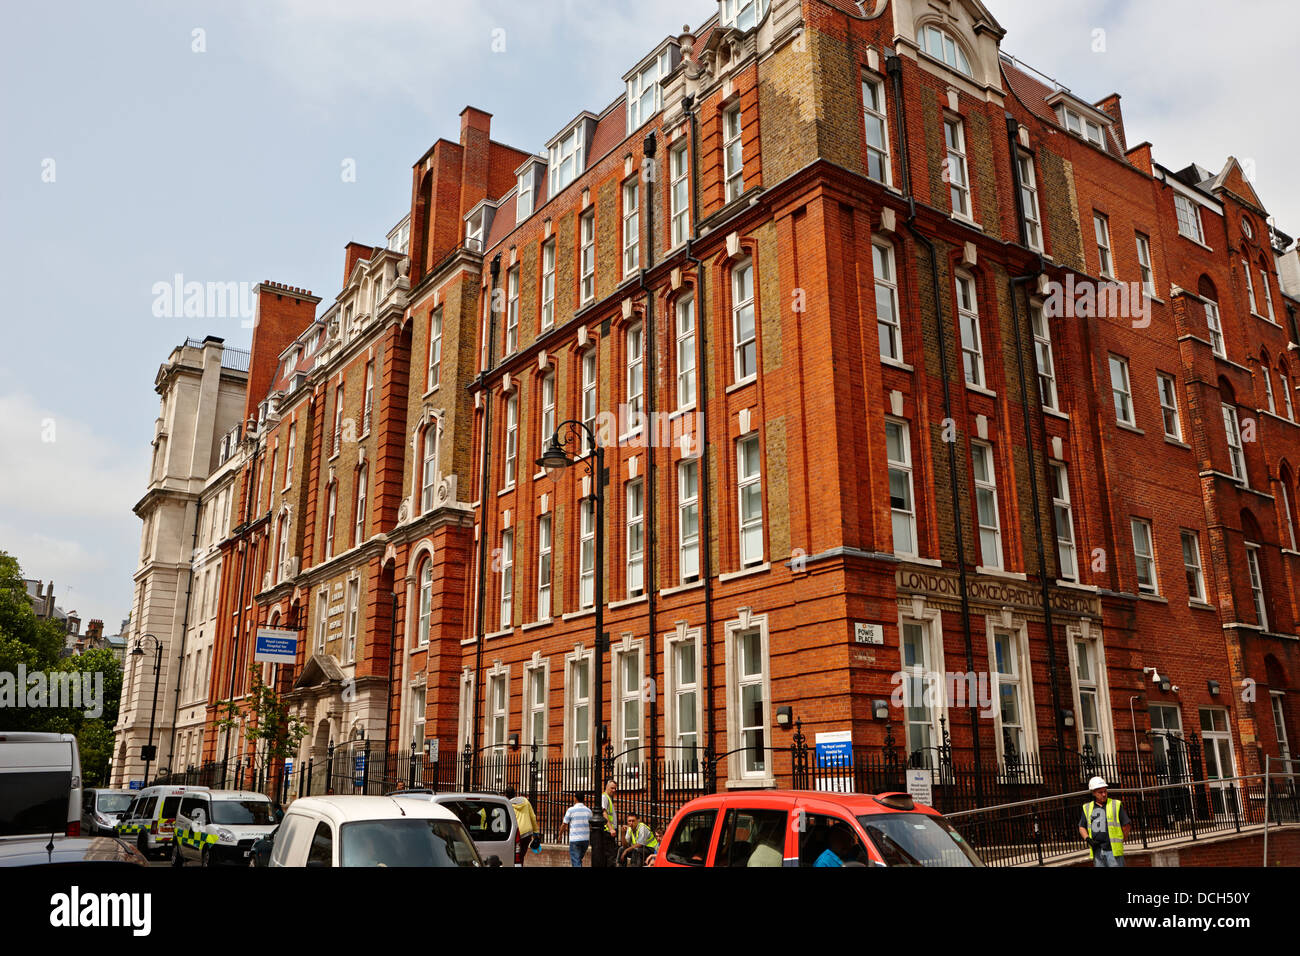 the royal london homeopathic hospital for integrated medicine London England UK Stock Photo